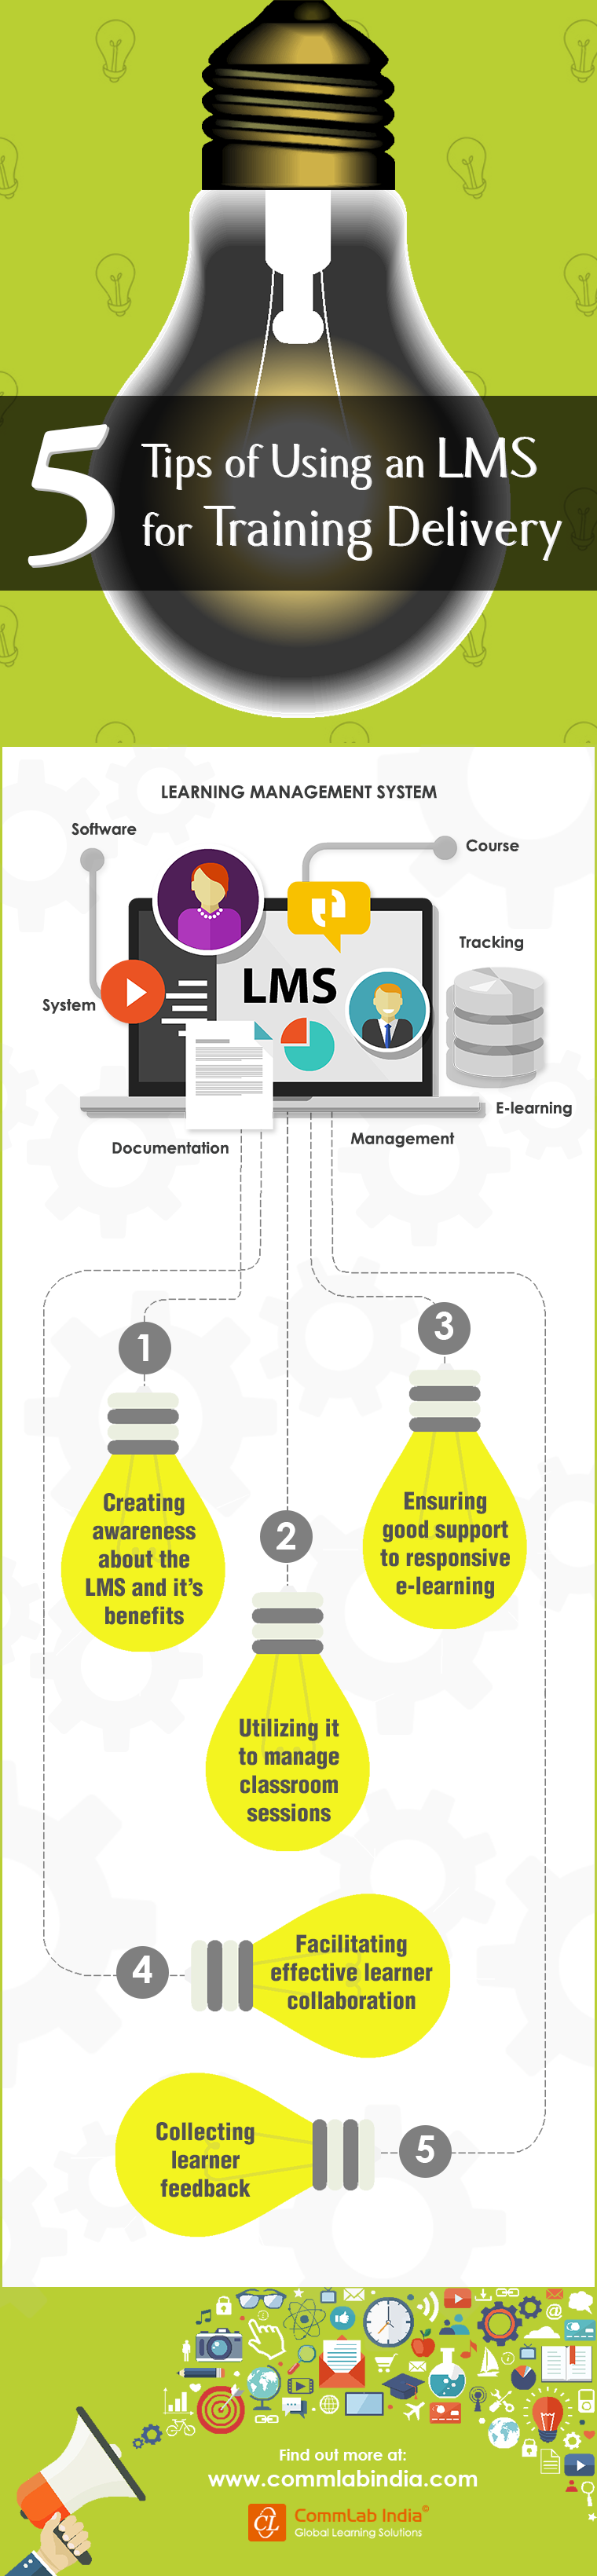 5 Tips on Using an LMS for Training Delivery [Infographic]